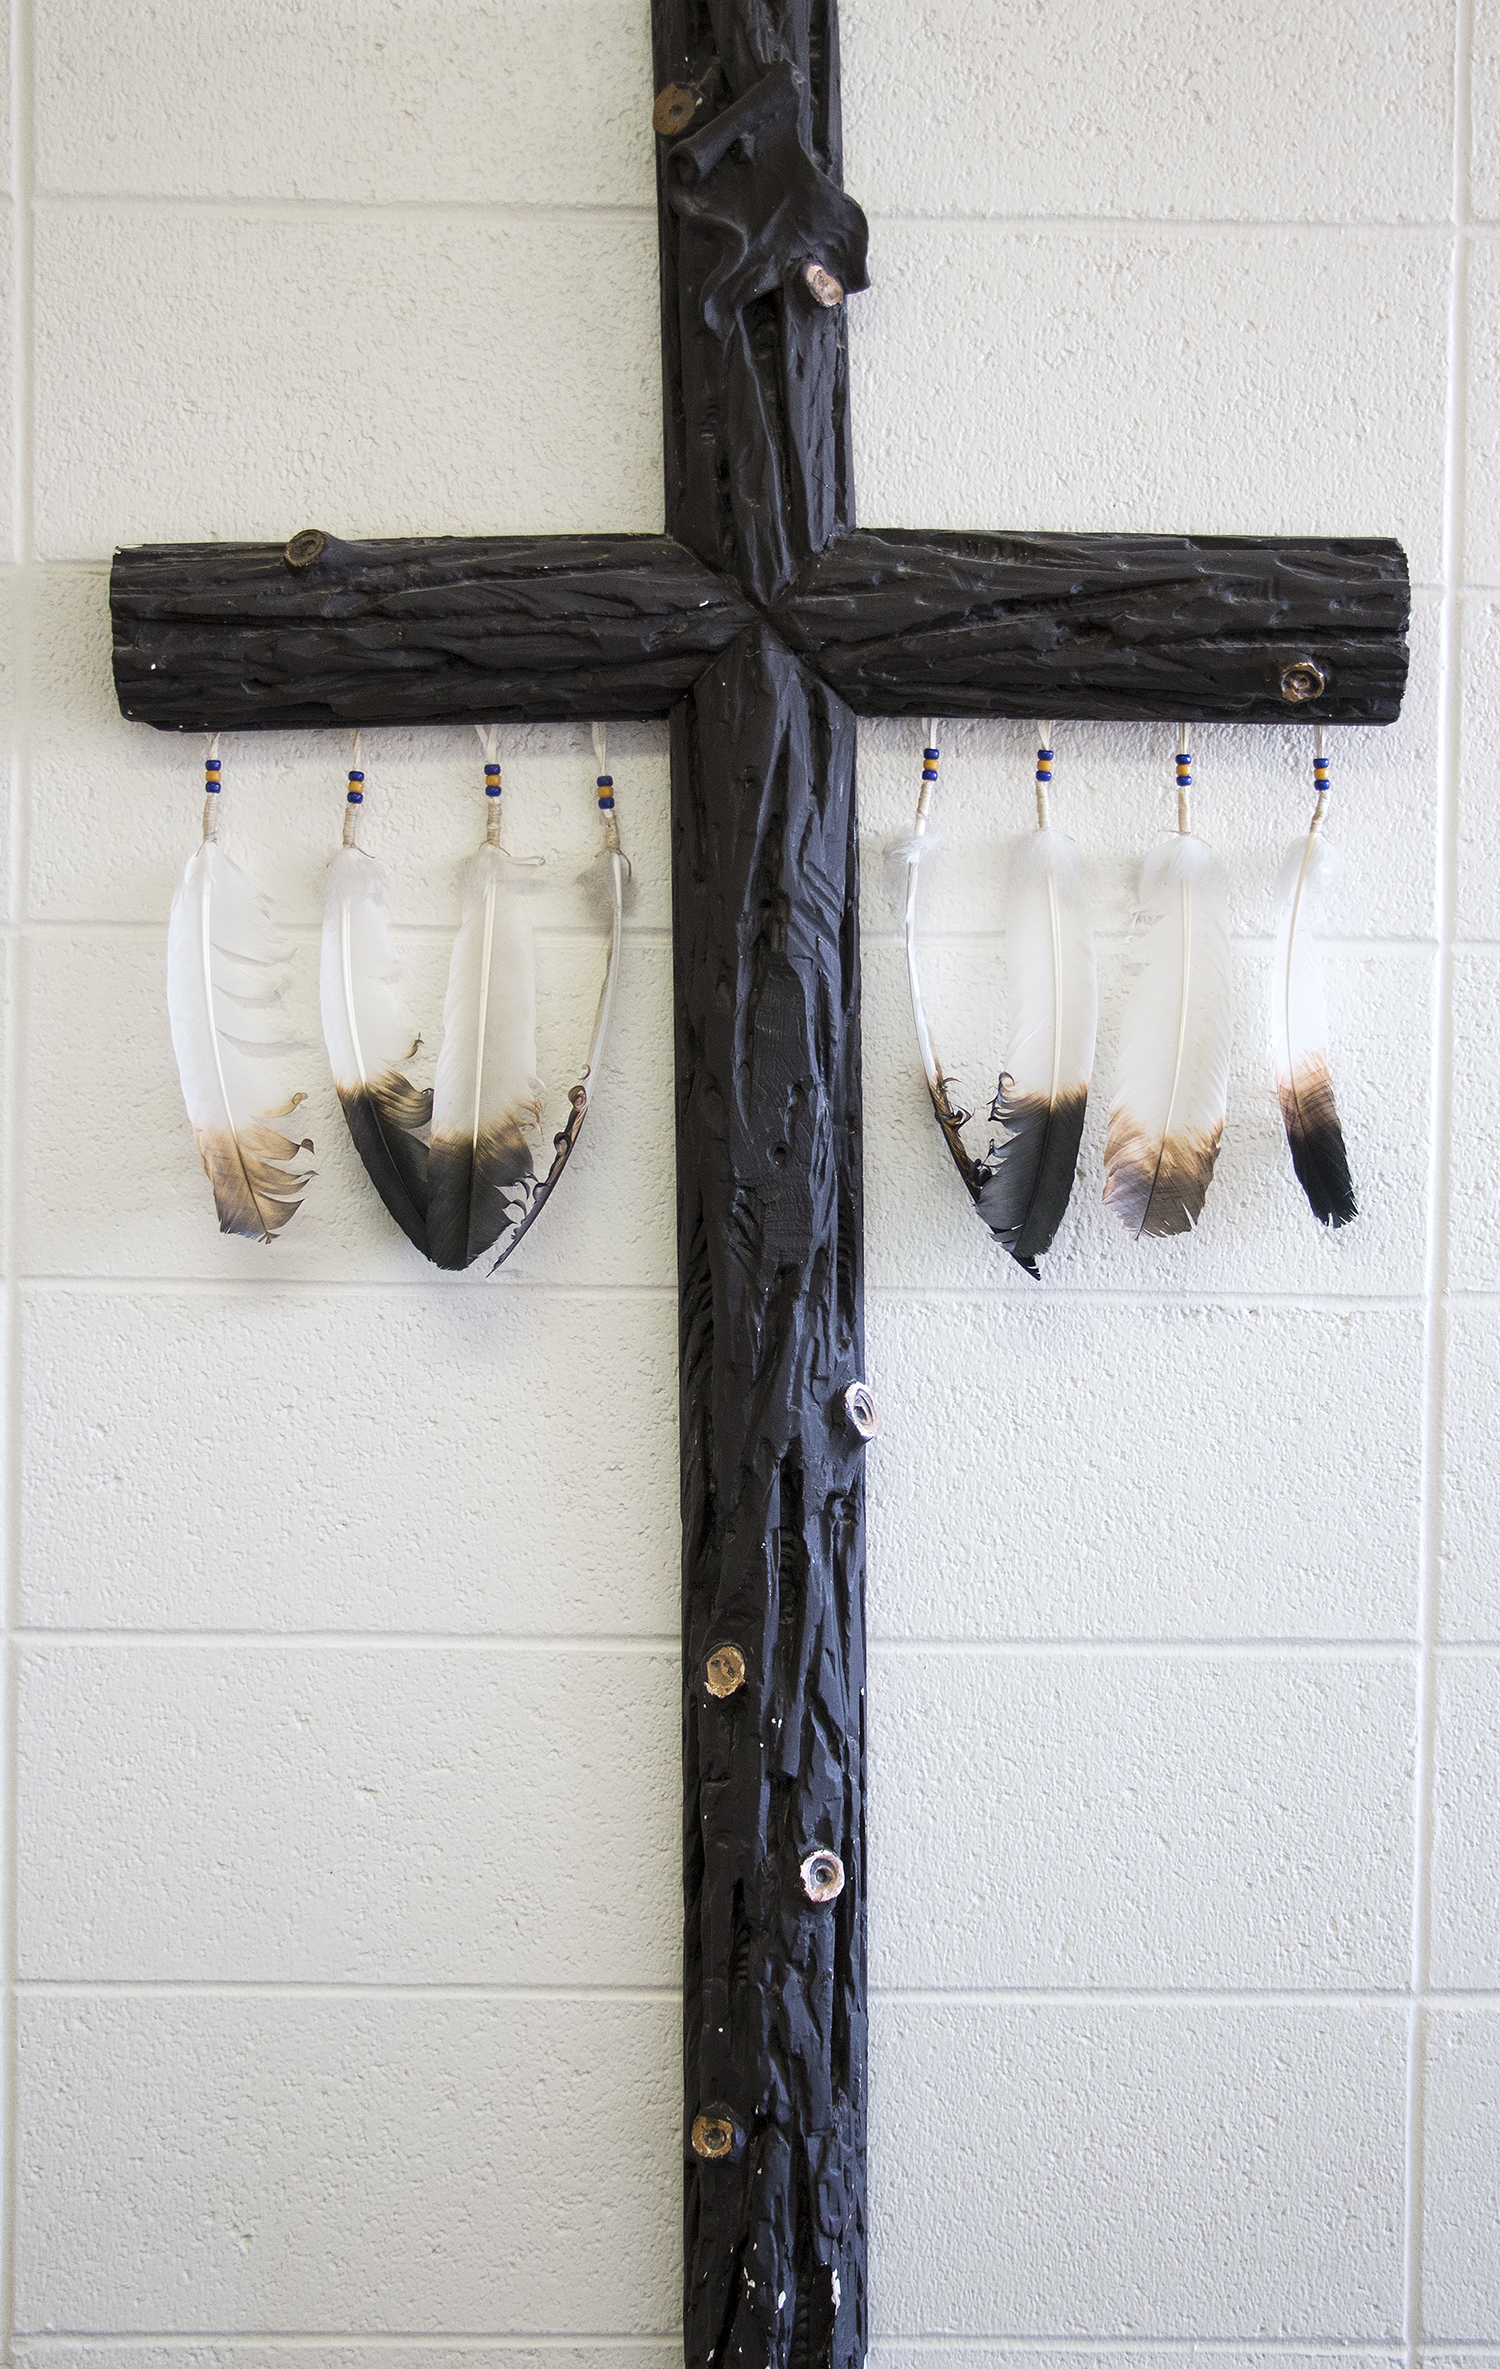 A cross hanging on a wall in St. Charles Mission, a Catholic Church on the Crow Reservation